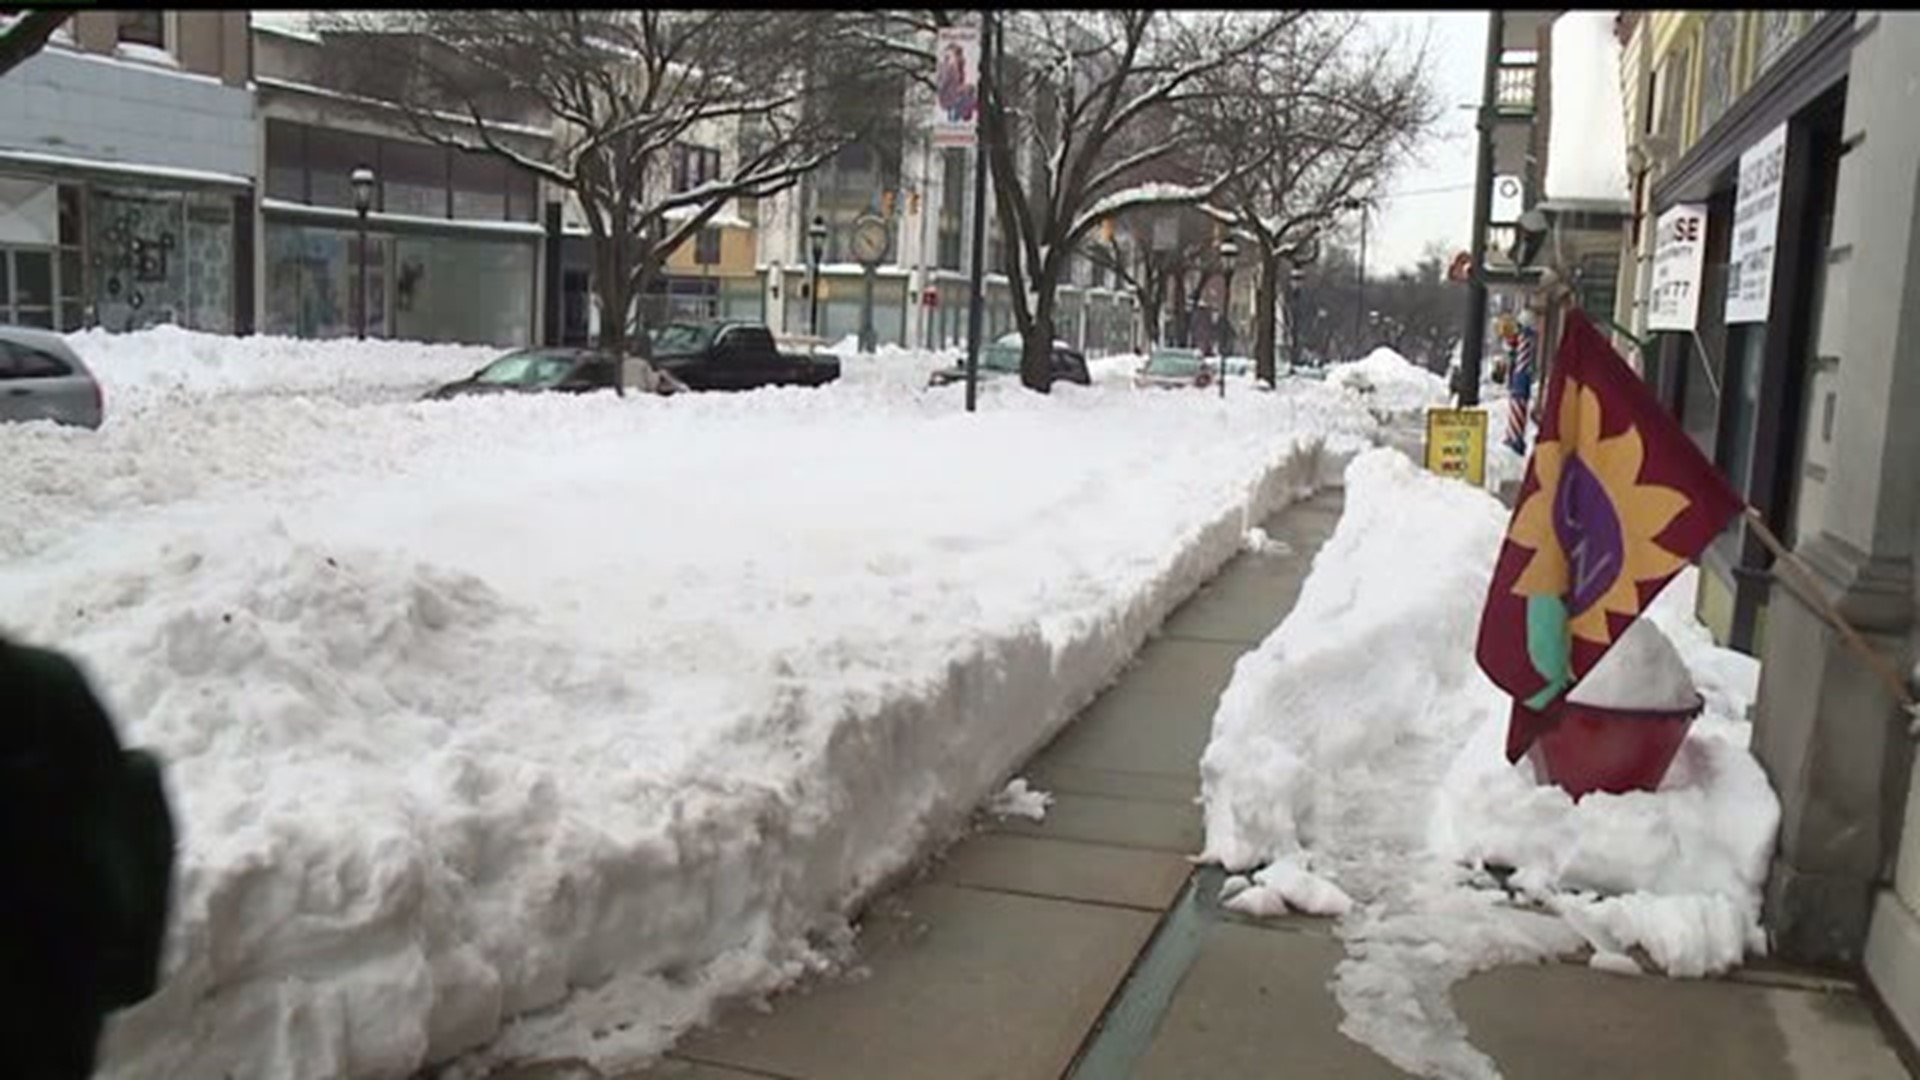 York businesses happy to reopen after storm